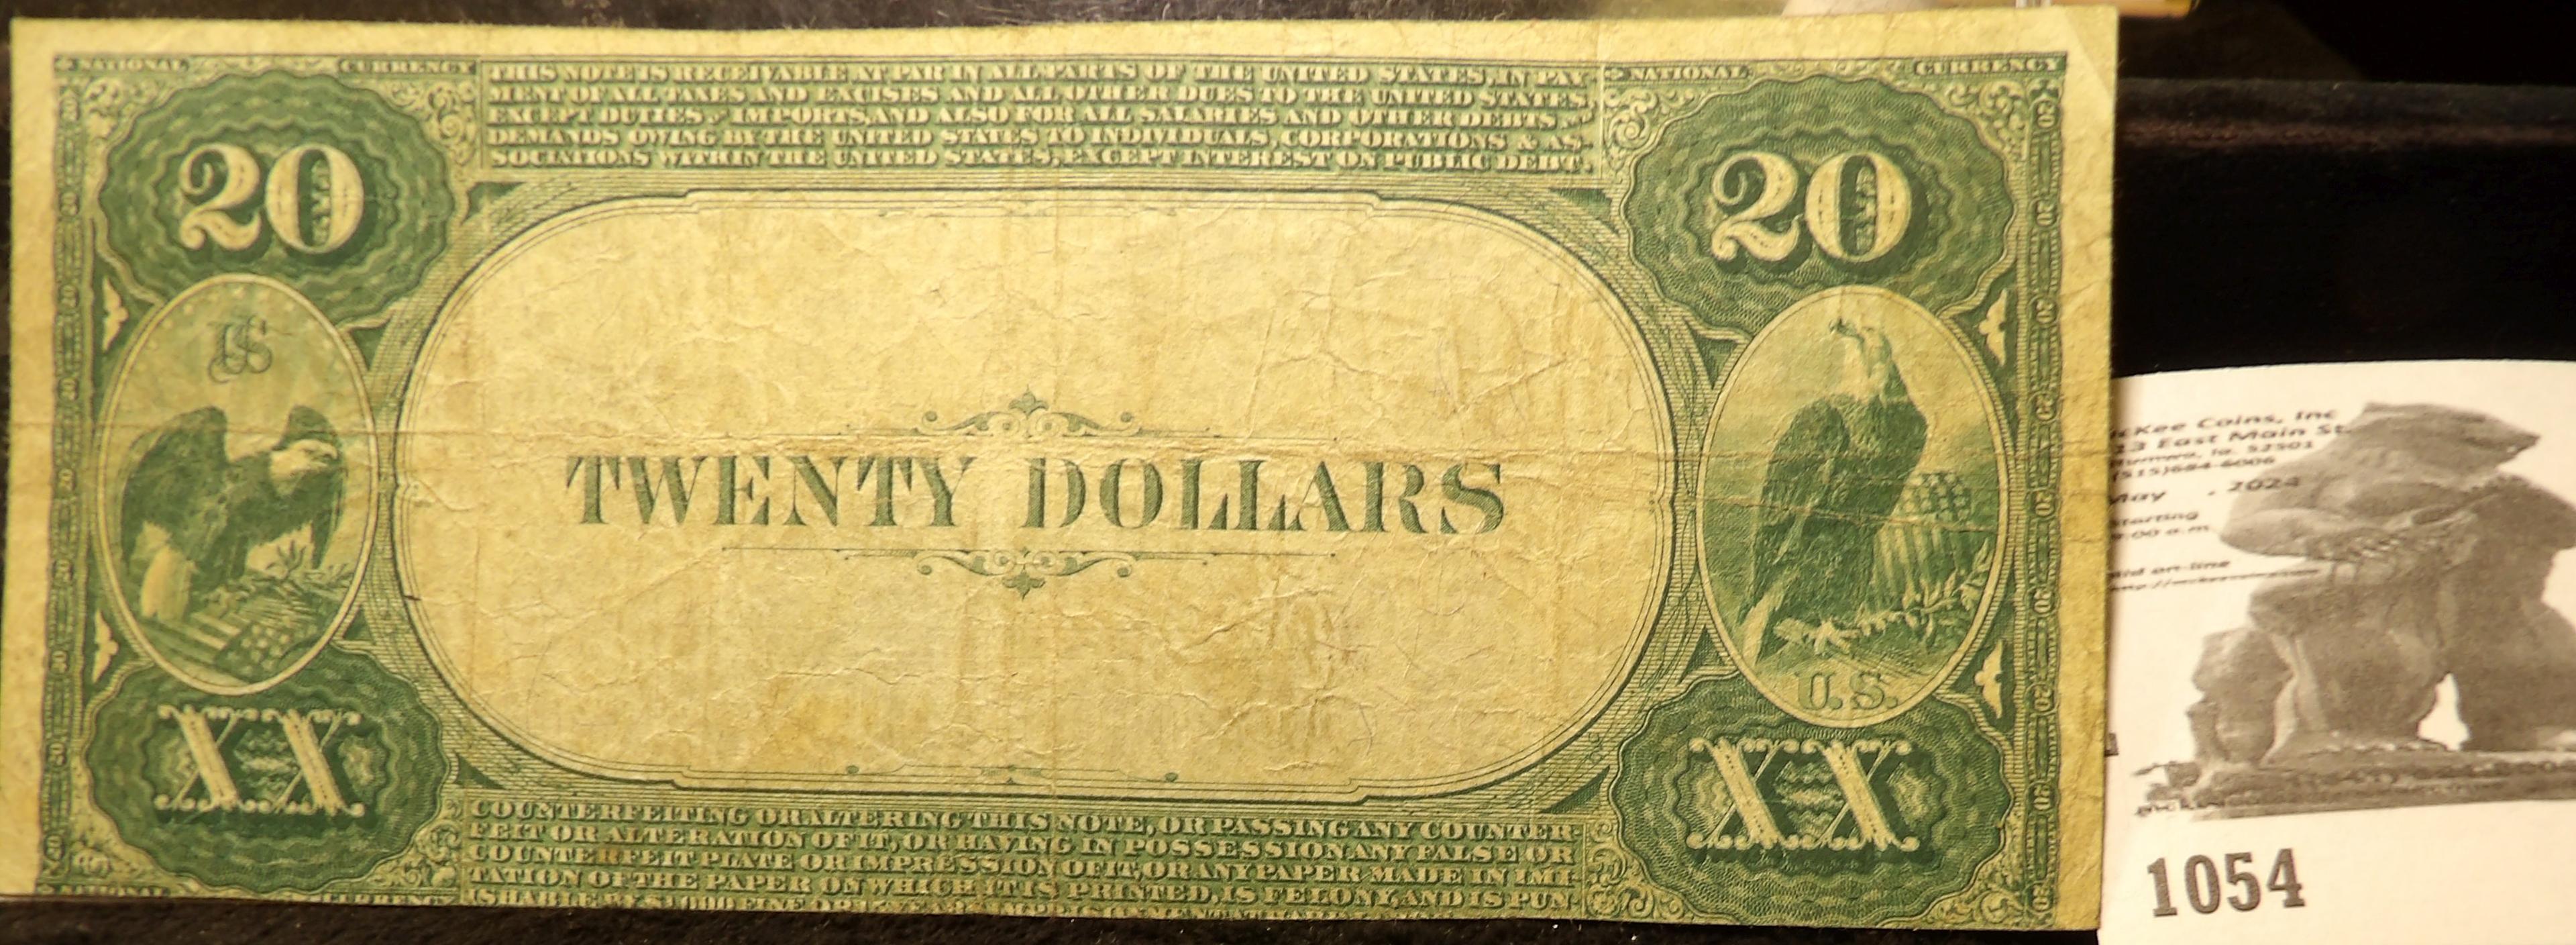 Series 1882 $20 National Currency The Ottumwa National Bank State of Iowa, Second Charter, Value Bac